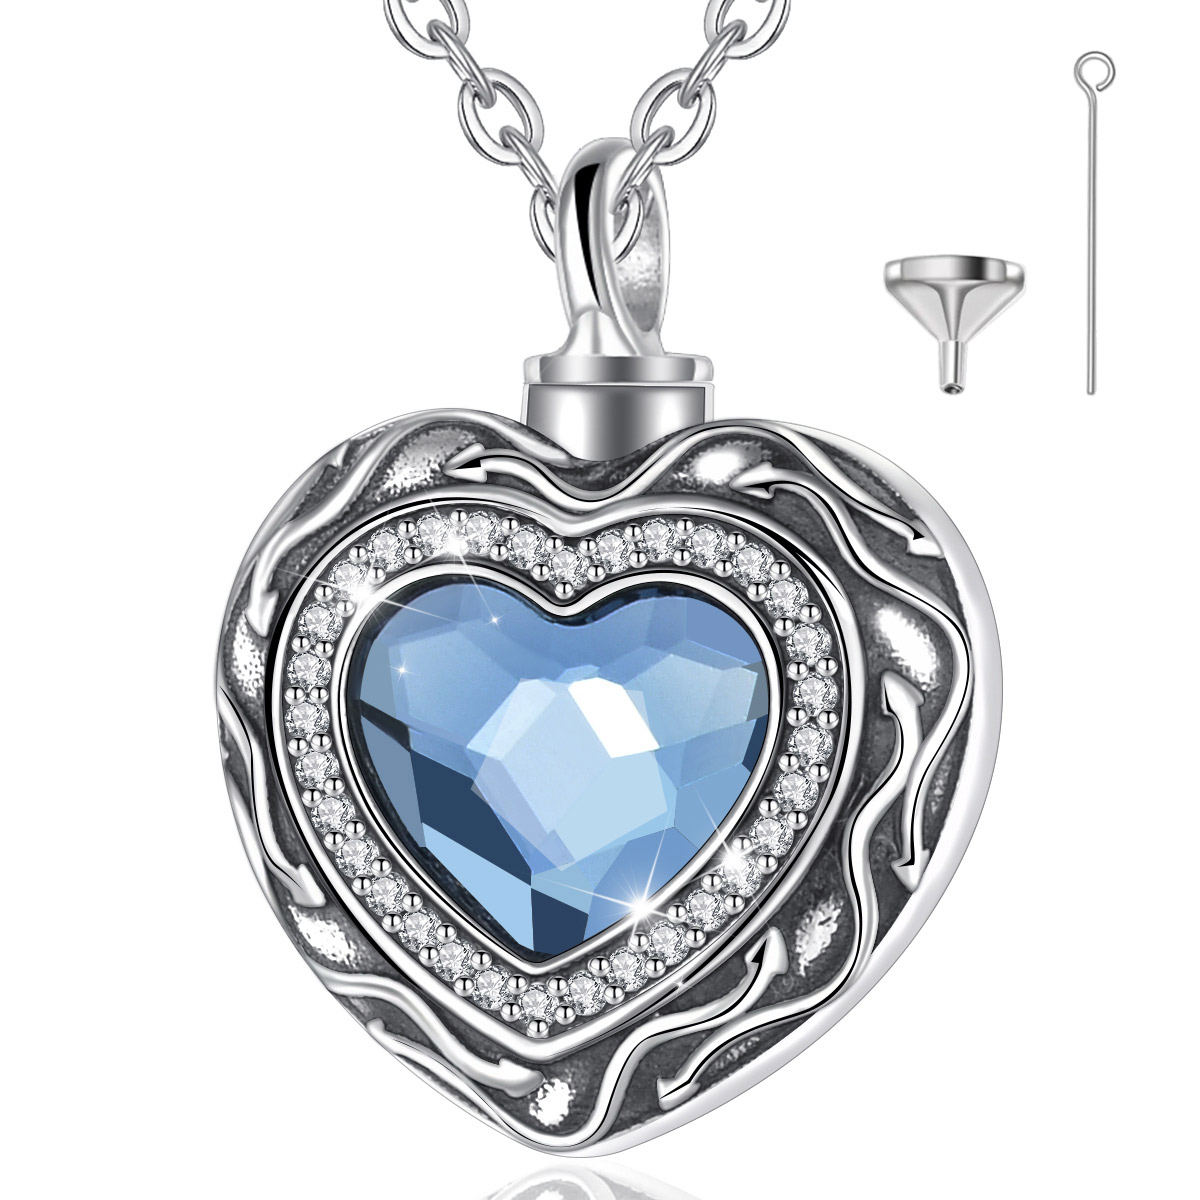 Merryshine Jewelry 925 sterling silver crystal heart ashes cremation jewelry urn pendant